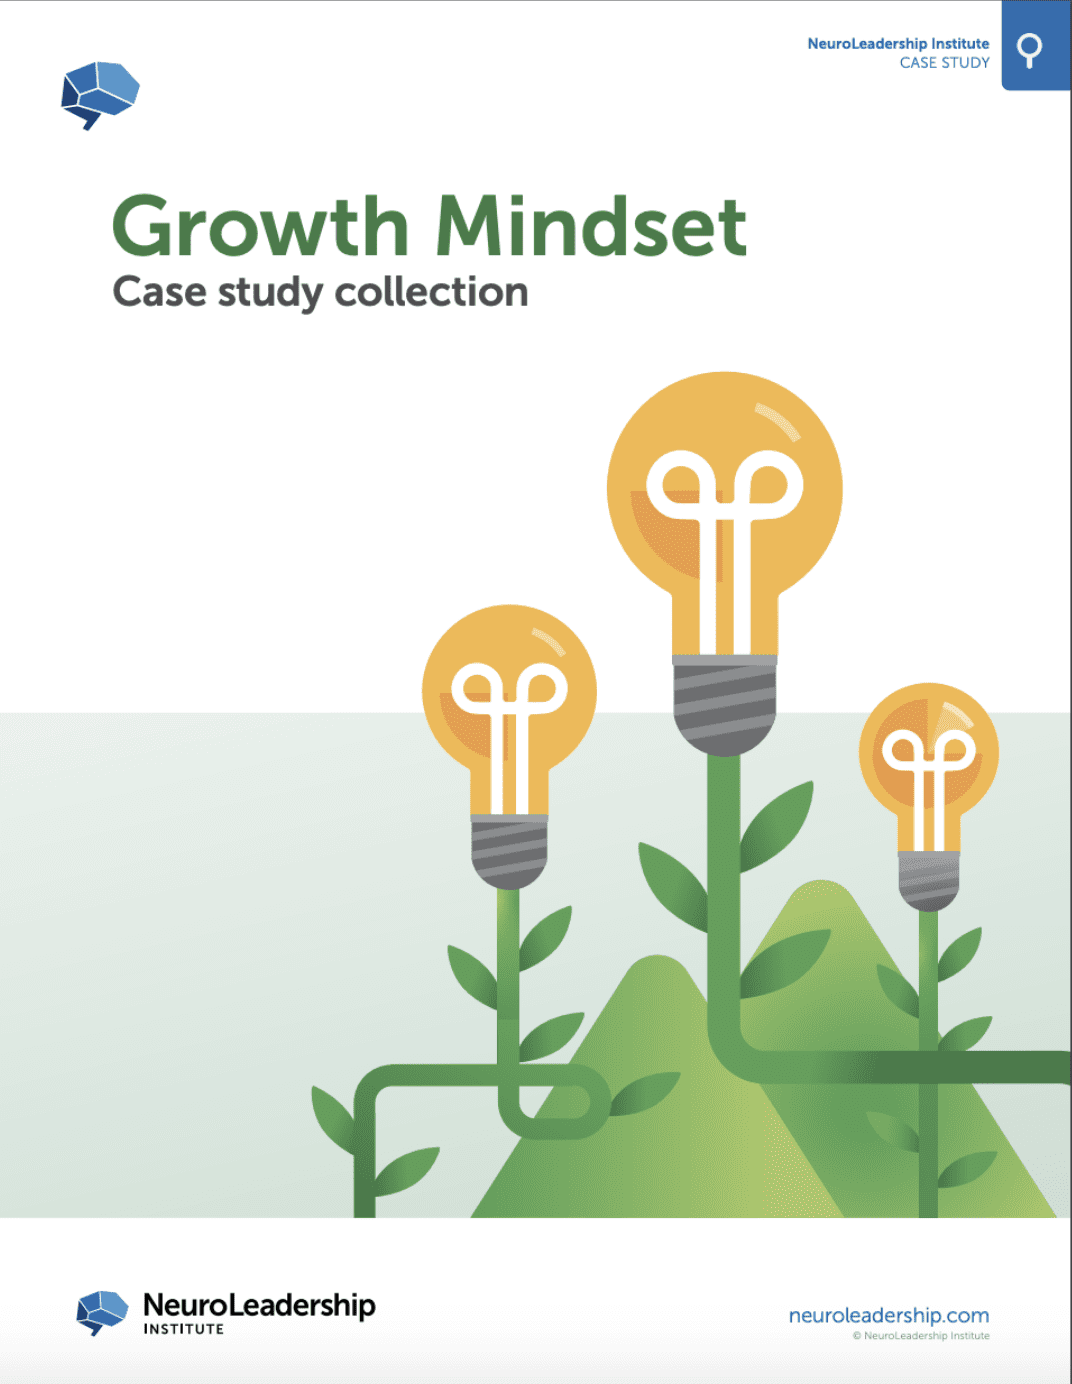 NLI growth mindset case study collection